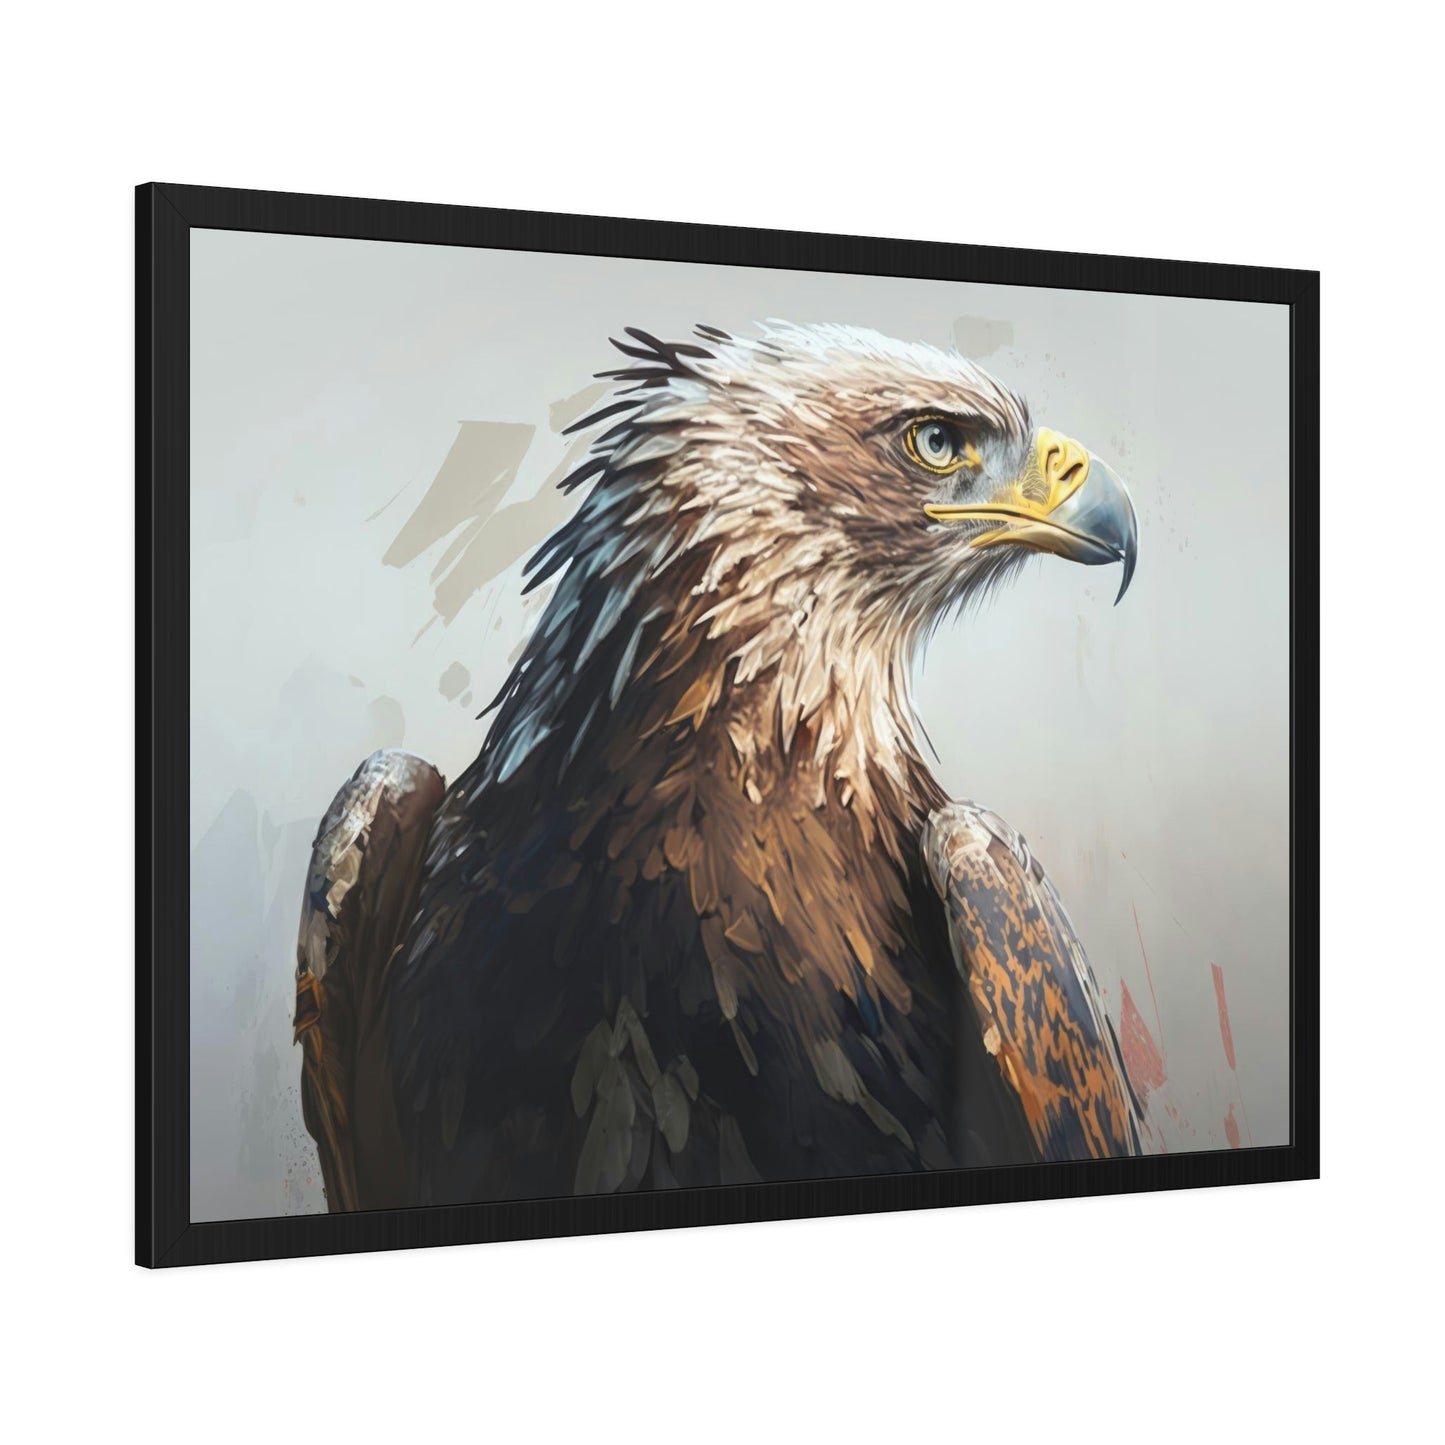 Eagle's Harmonious Flight: Canvas Print, Enveloping with Serenity and Power